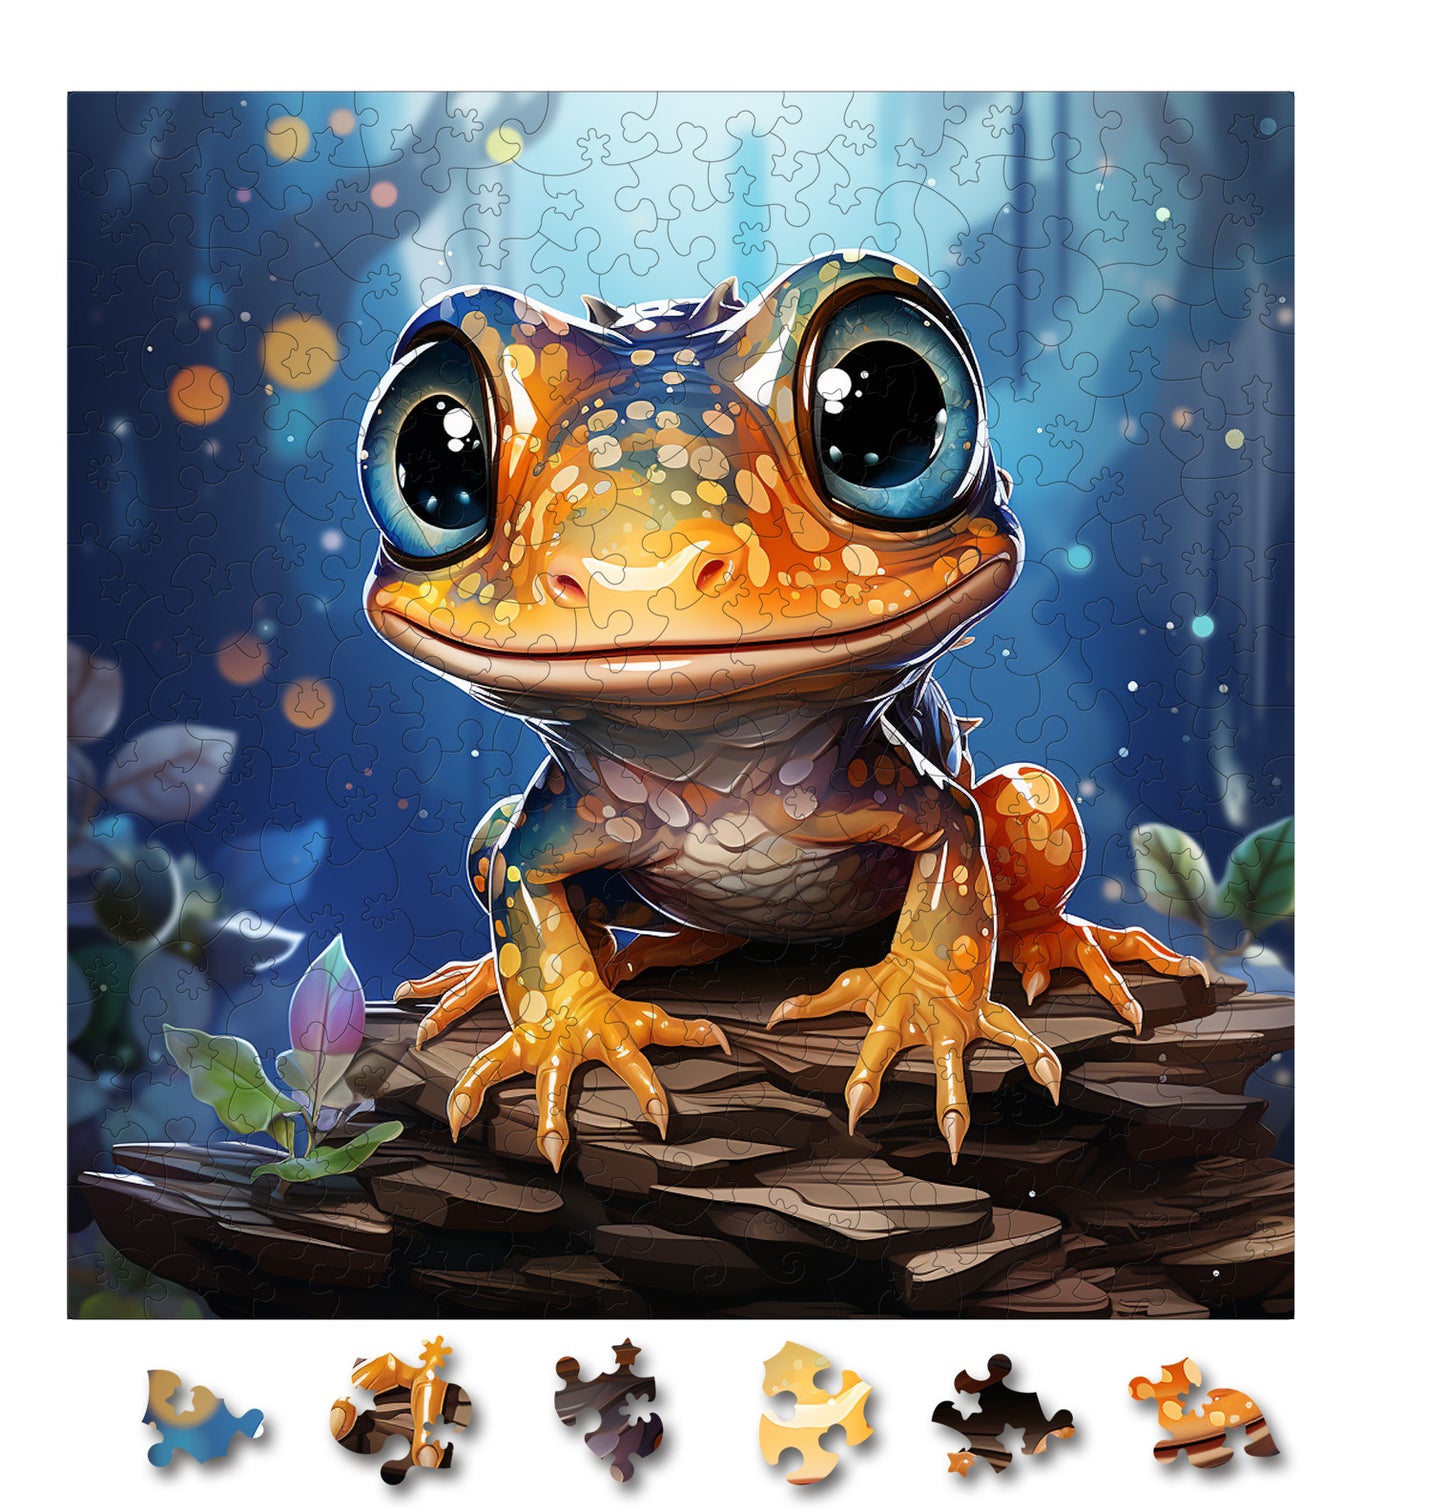 Puzzle cu Animale - Baby Toad 4 - 200 piese - 30 x 30 cm